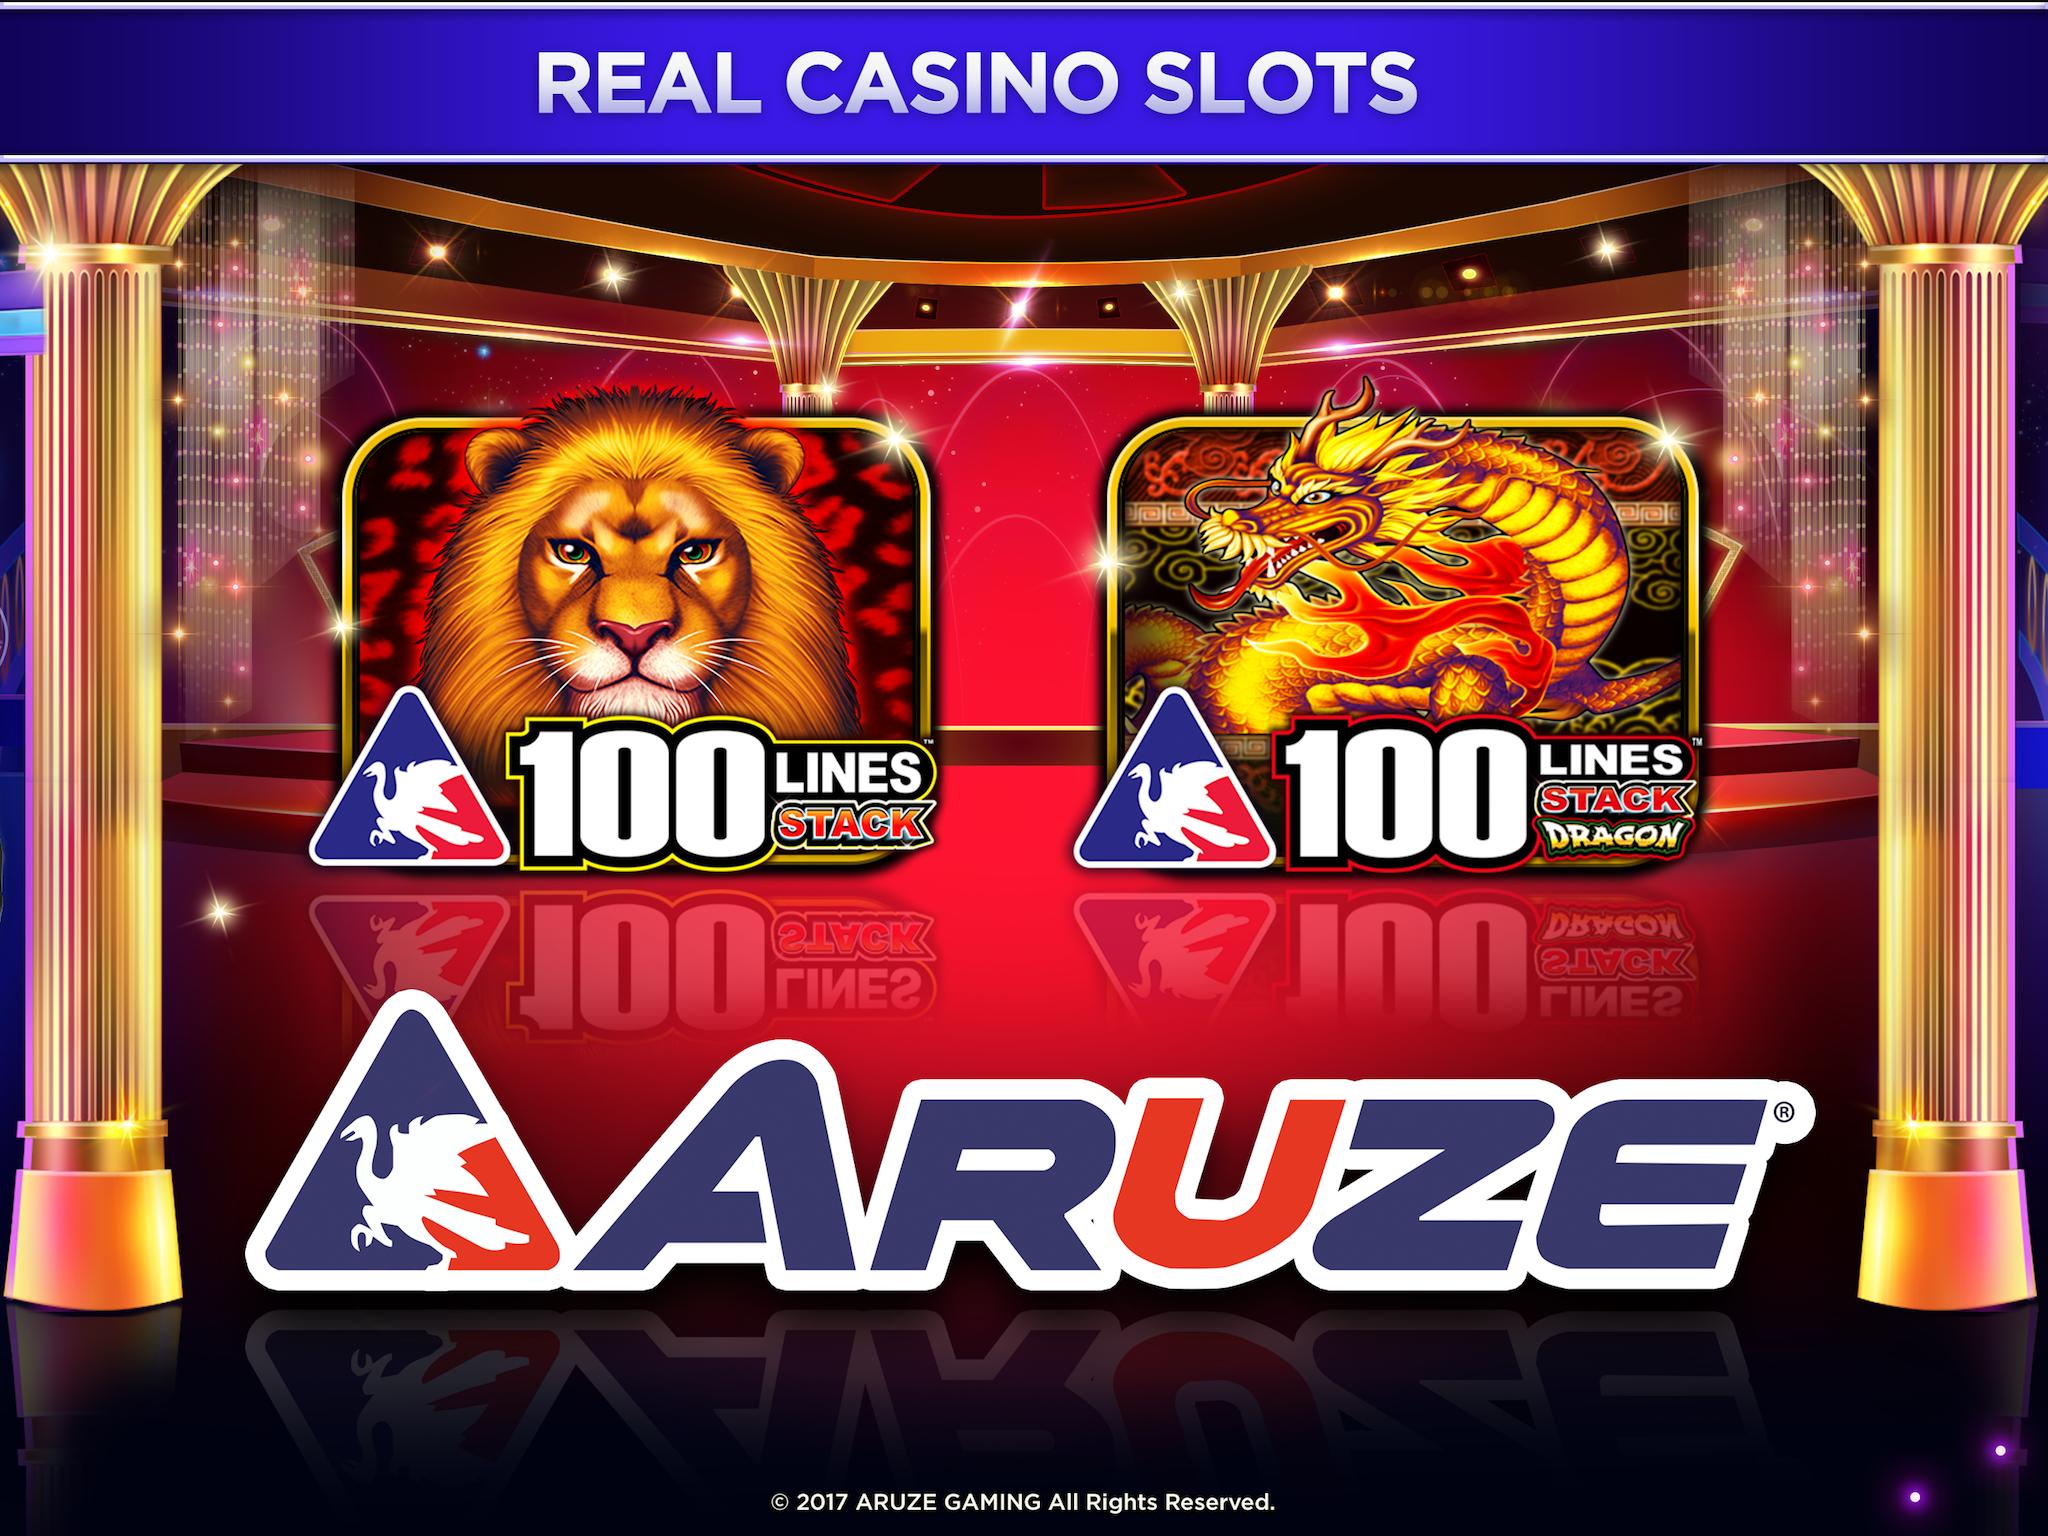 Wheel of Fortune Slots Casino for Android - APK Download